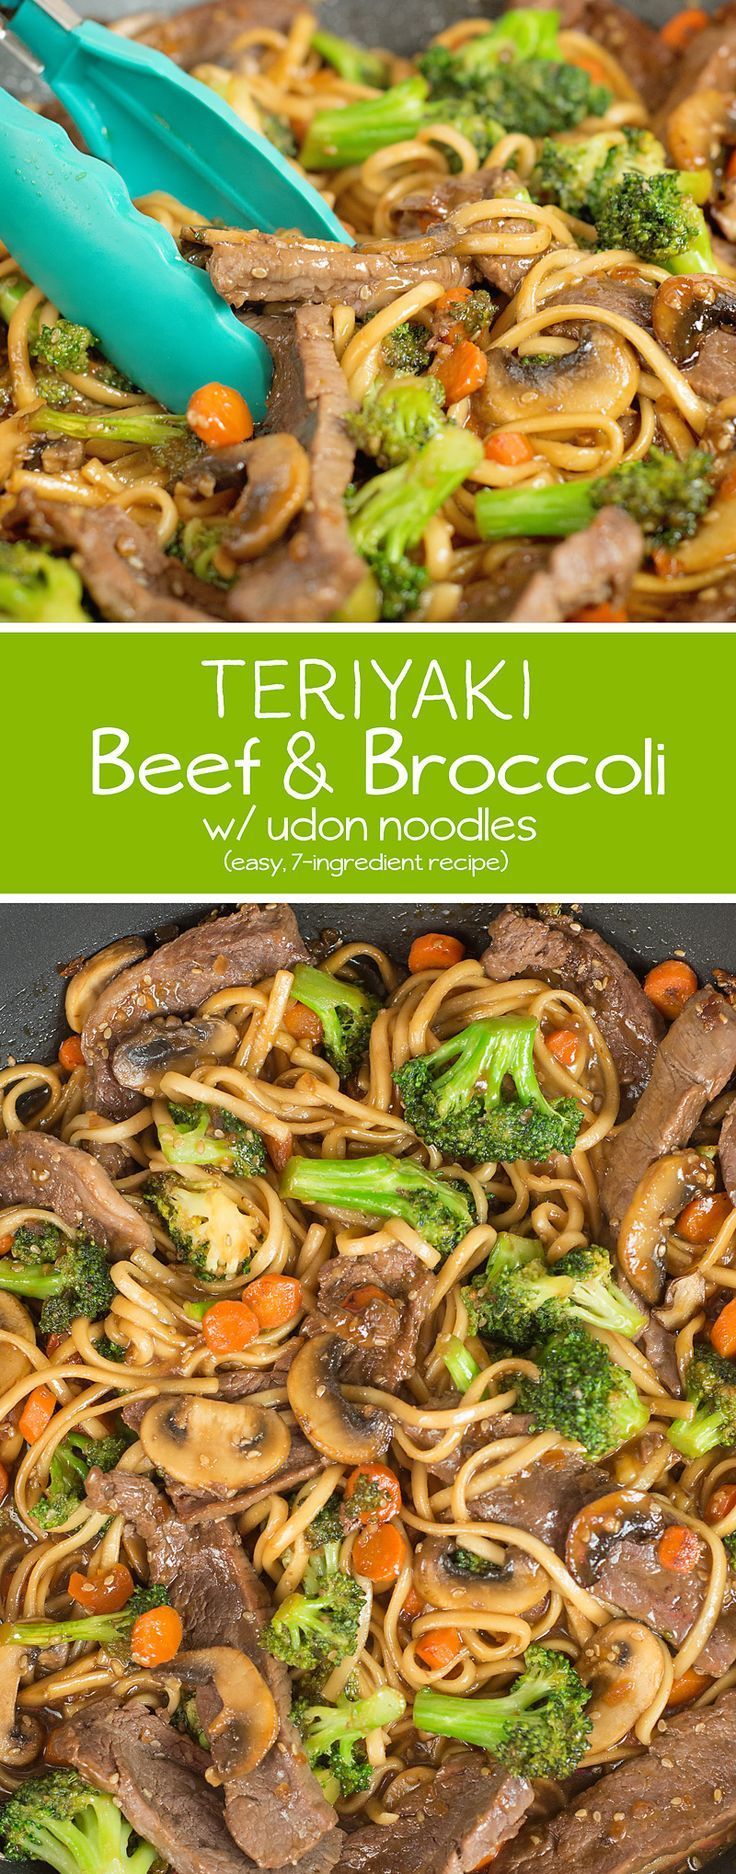 This Teriyaki Beef and Broccoli recipe is easy to make and perfect for busy nights!  With only a few ingredients, you can have